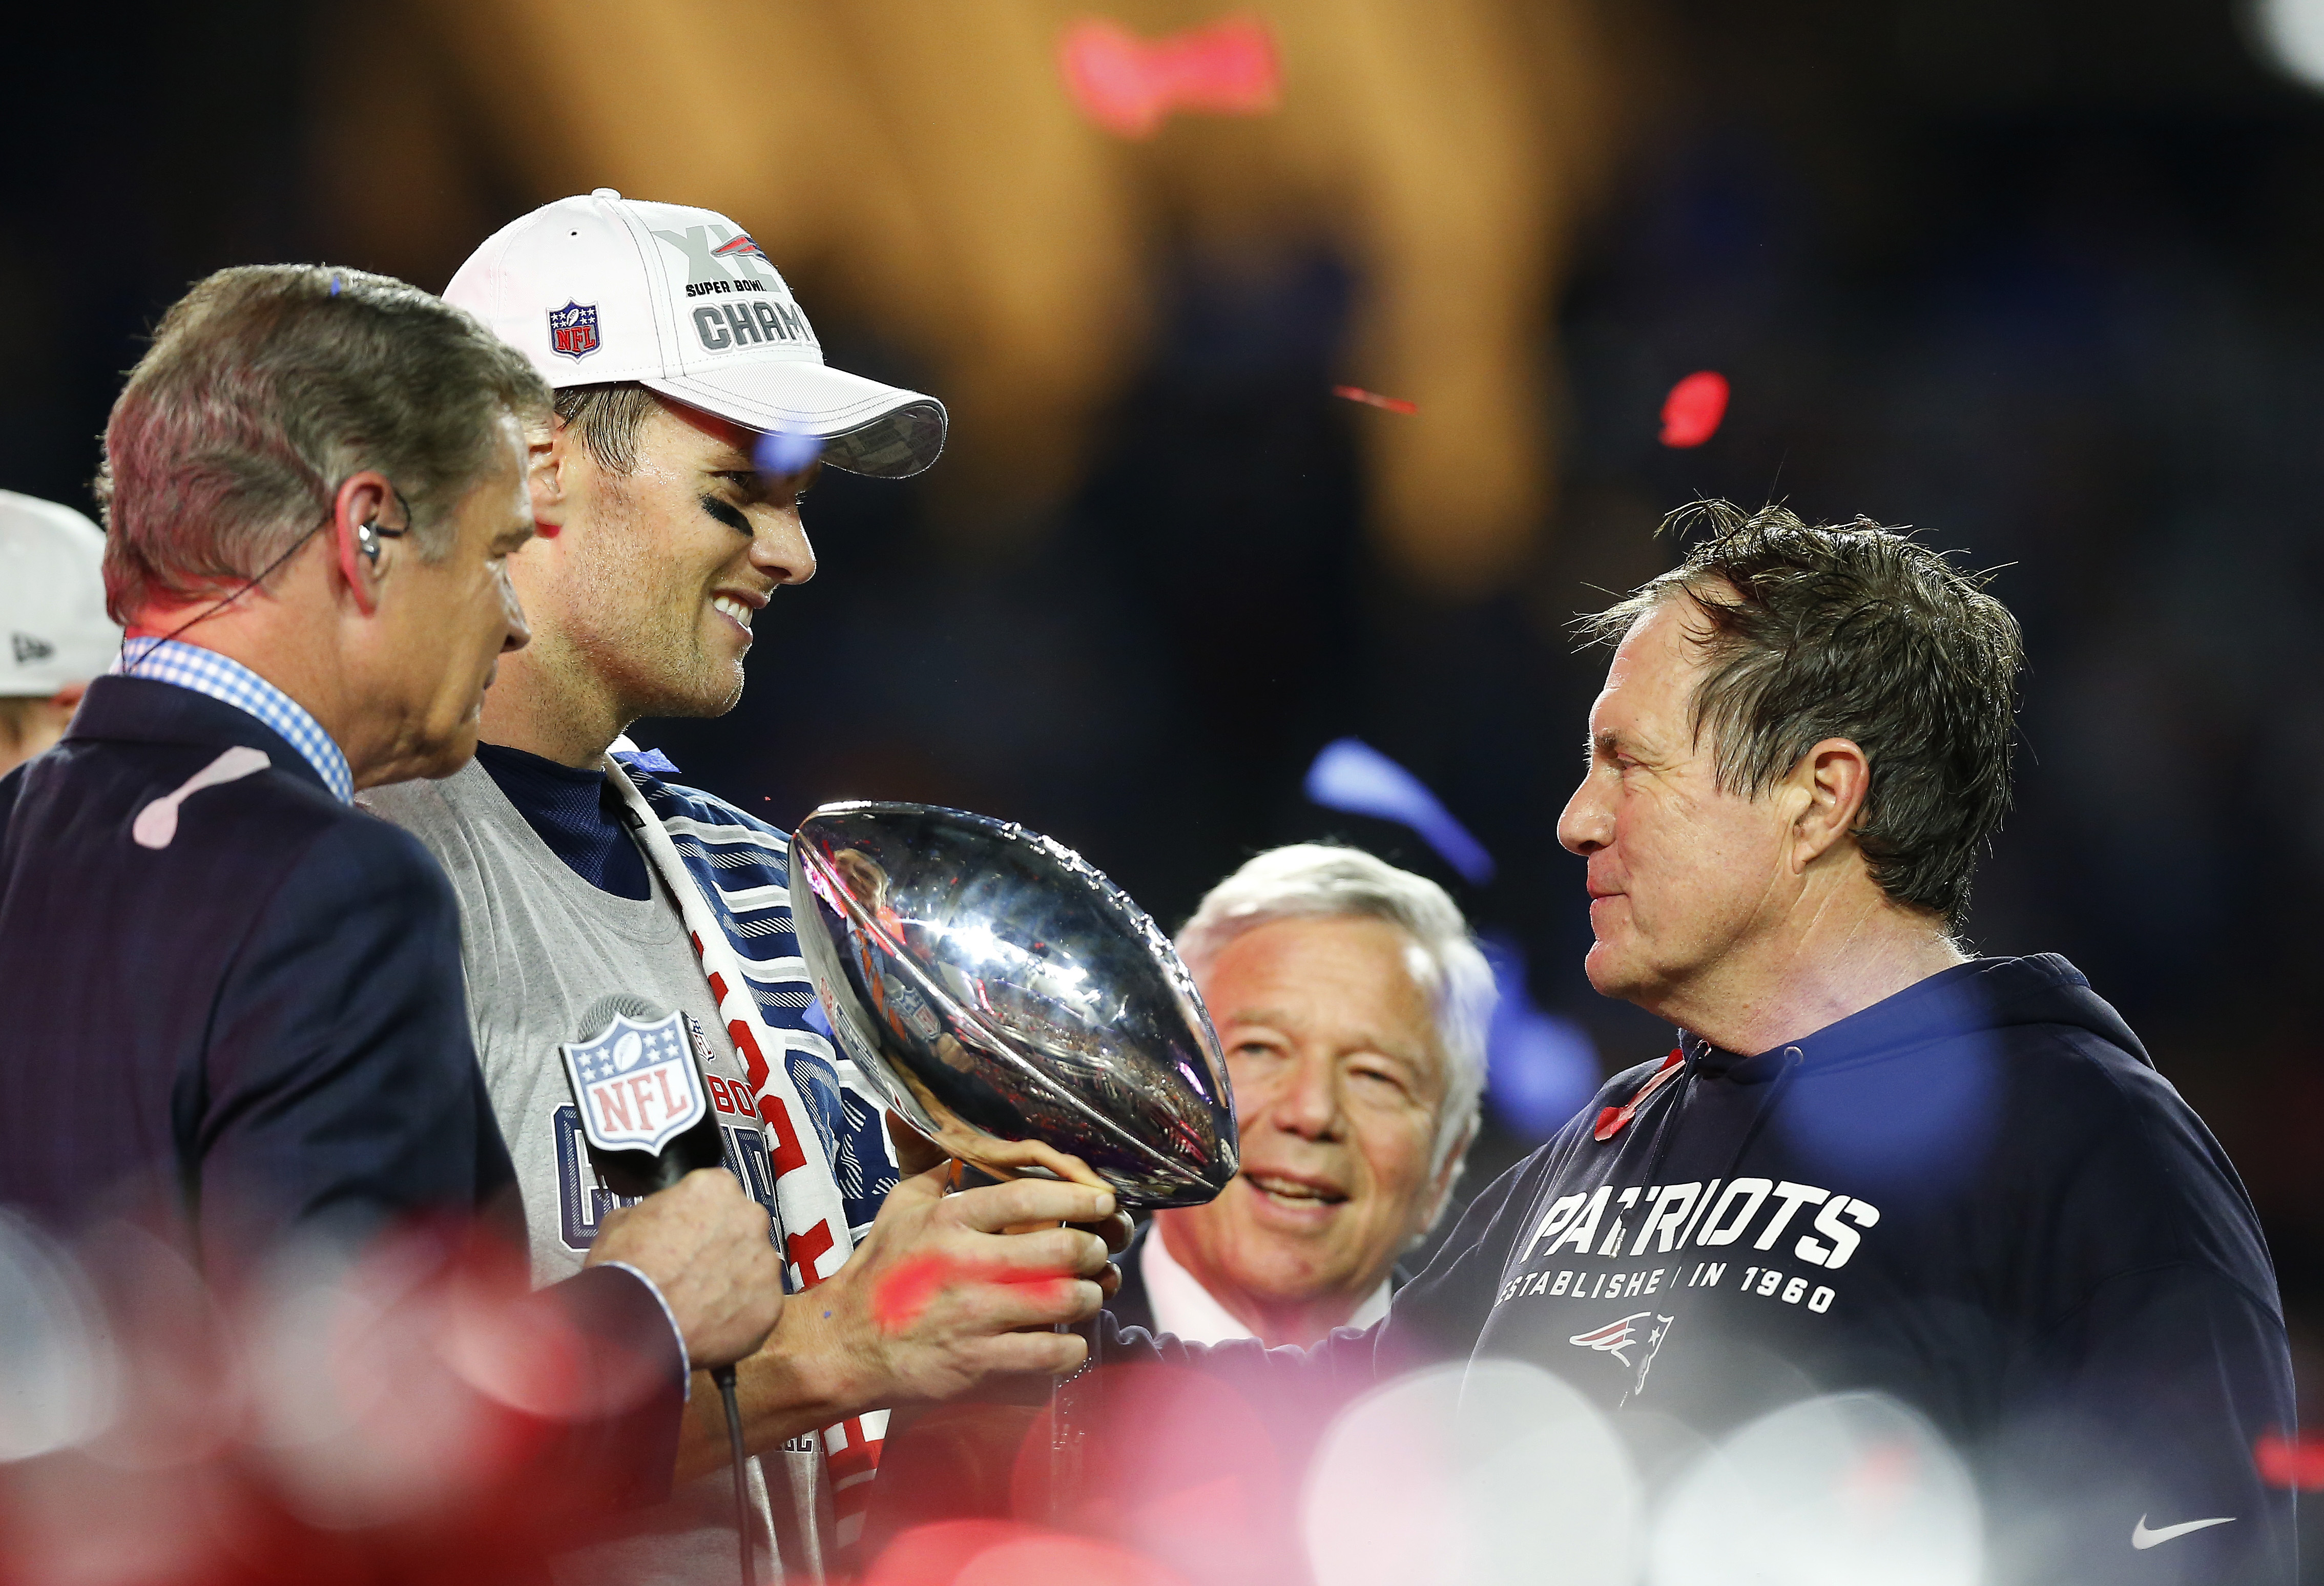 Tom Brady, Patriots owner Robert Kraft and head coach Bill Belichick celebrate with the Vince Lombardi Trophy in 2015